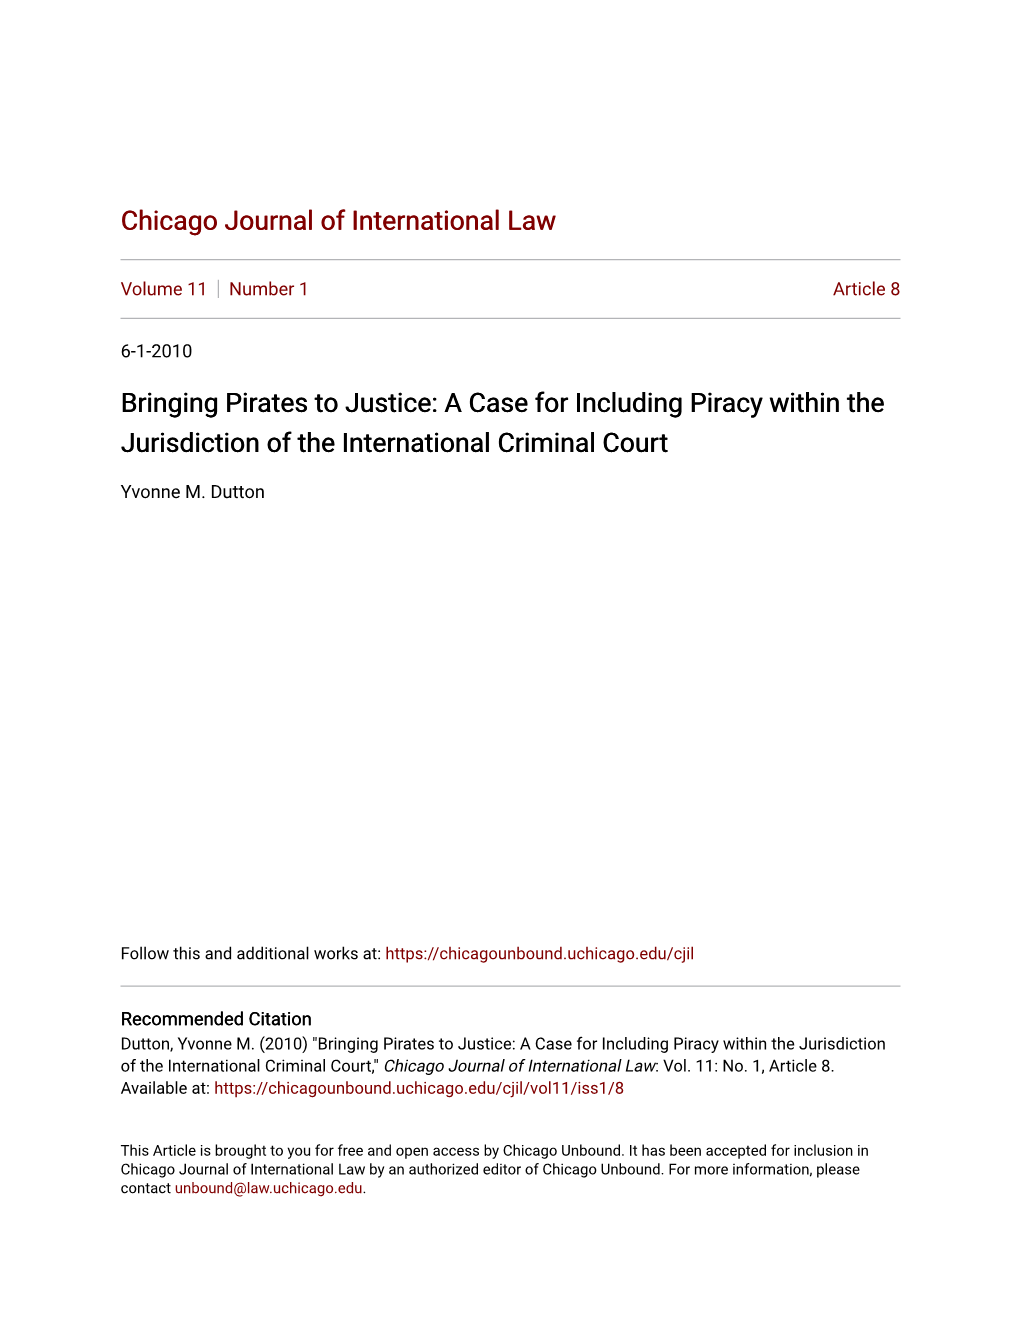 Bringing Pirates to Justice: a Case for Including Piracy Within the Jurisdiction of the International Criminal Court